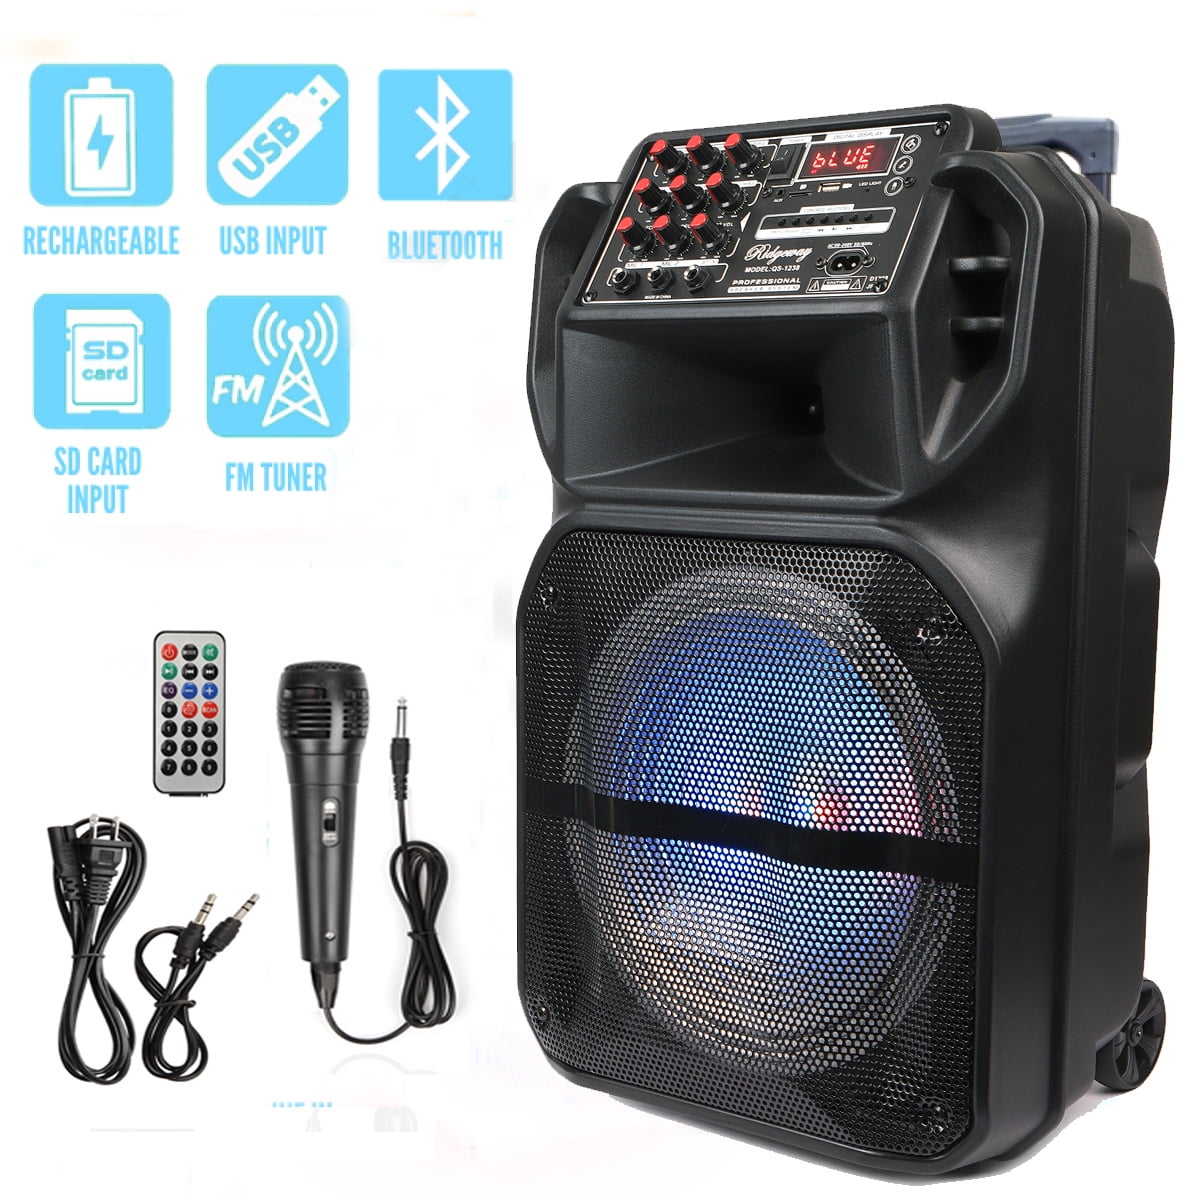 Ortizan M8 100W Powerful Loud Sound Bluetooth Speaker with Monstrous Bass,  Portable Party Speaker for Outdoor 